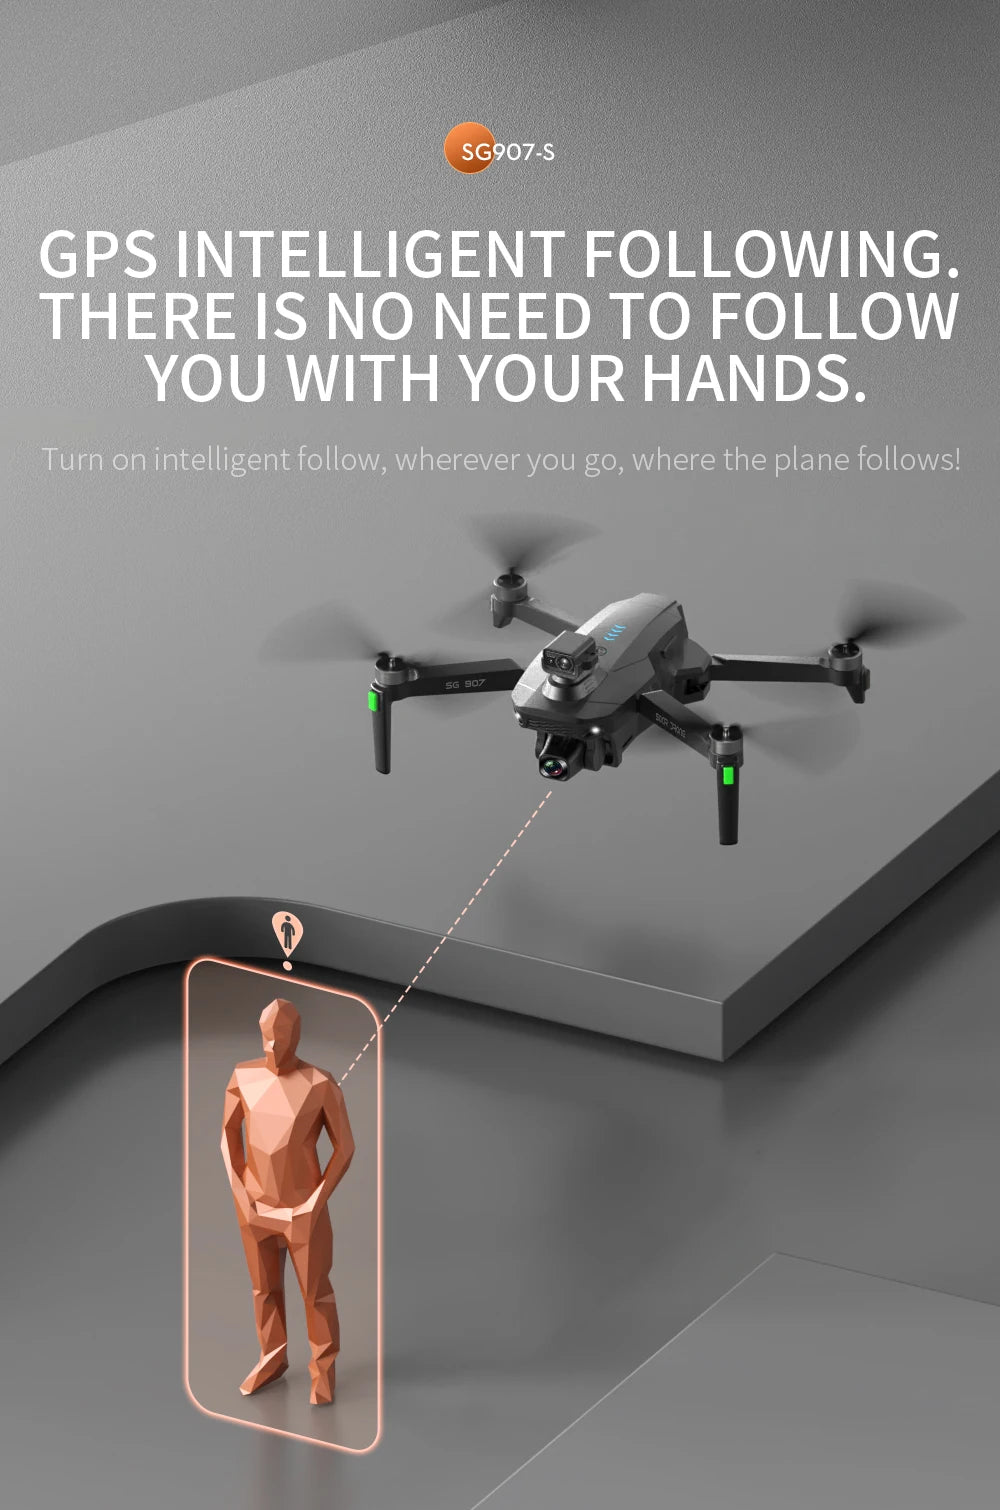 SG907S Drone, turn on intelligent follow; wherever you go, where the plane follows . SG907